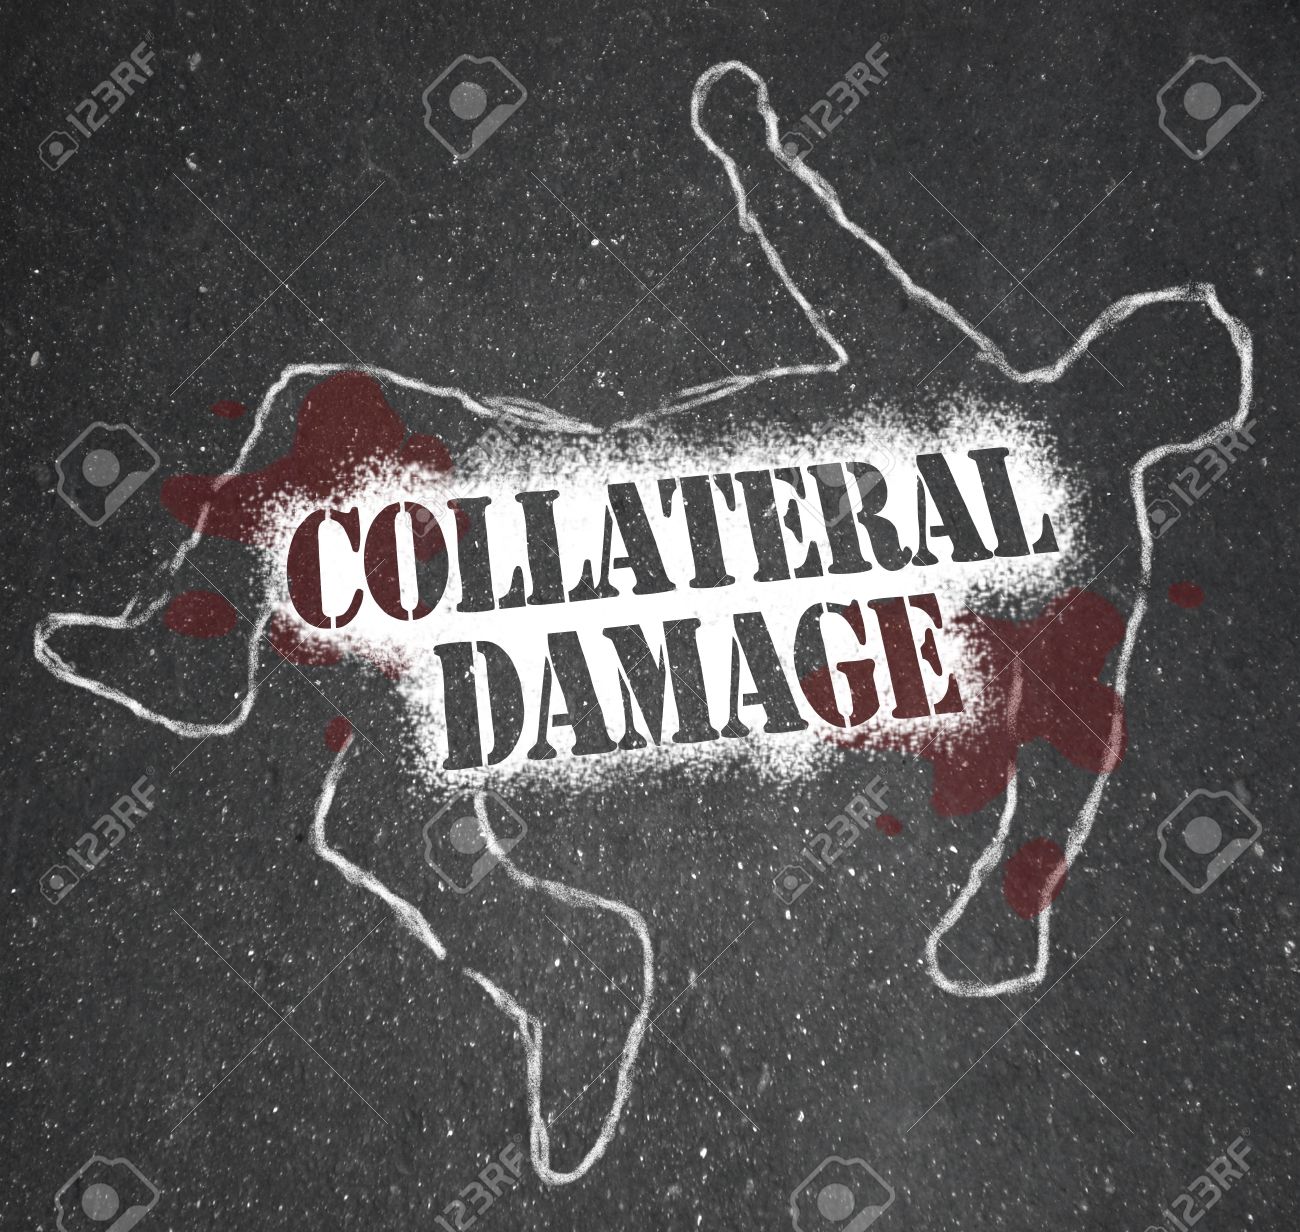 Collateral Damage #5